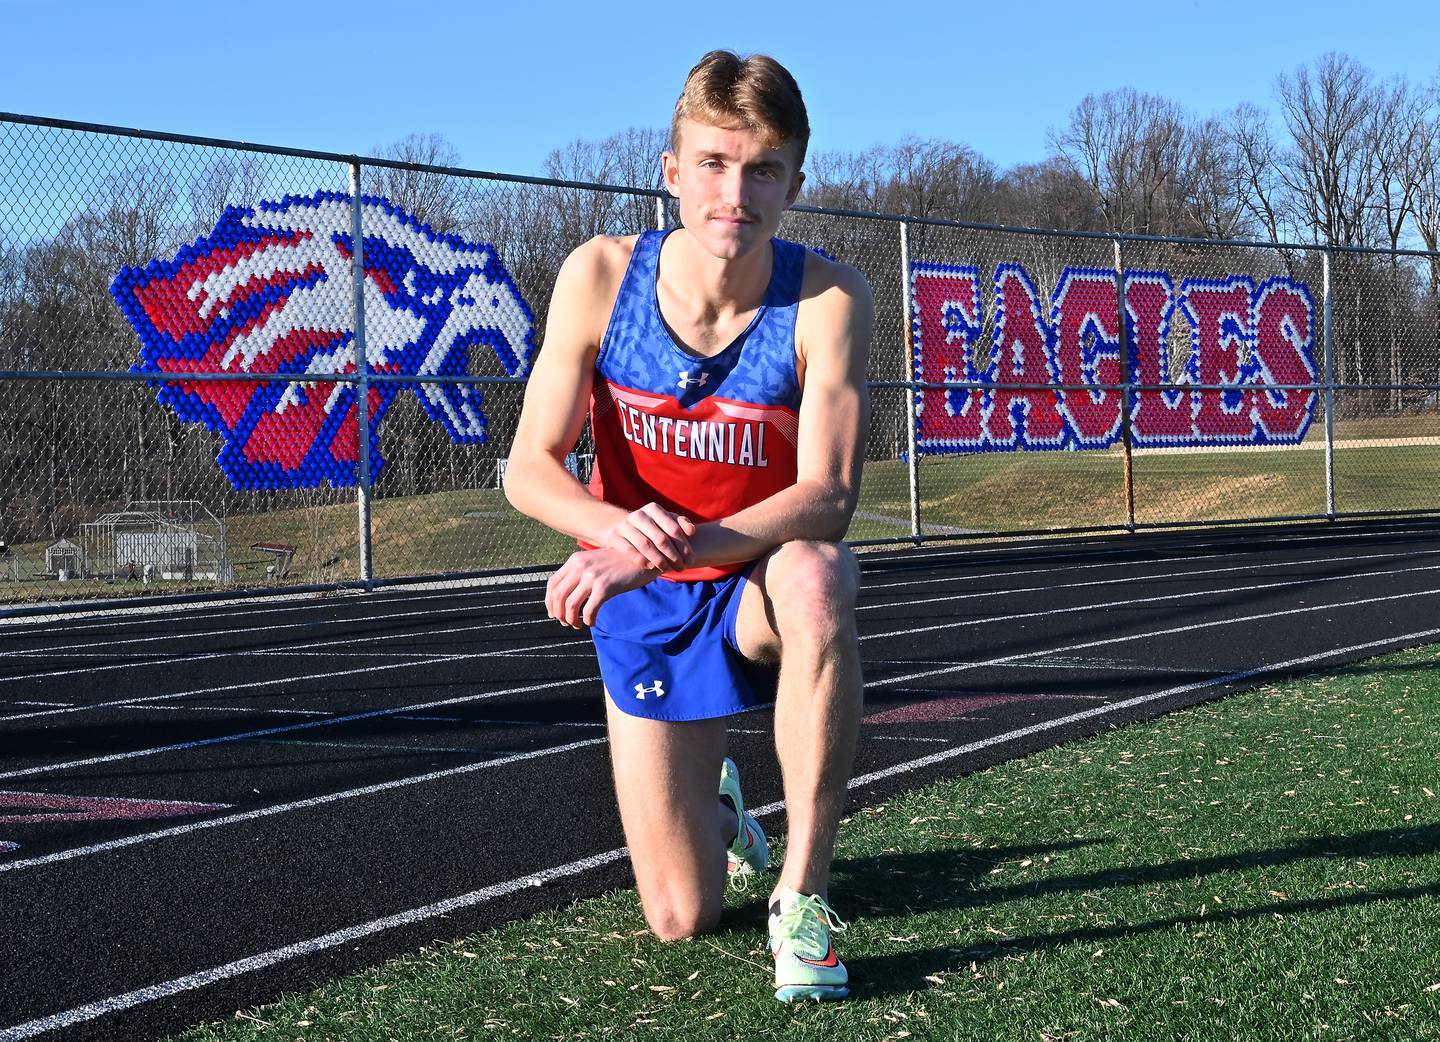 Centennial senior Sebastian Martinez won both the Howard County and Class 3A East Regional championships, also placing third at states. He is the 2022 Howard County Times/Columbia Flier boys cross country Runner of the Year.